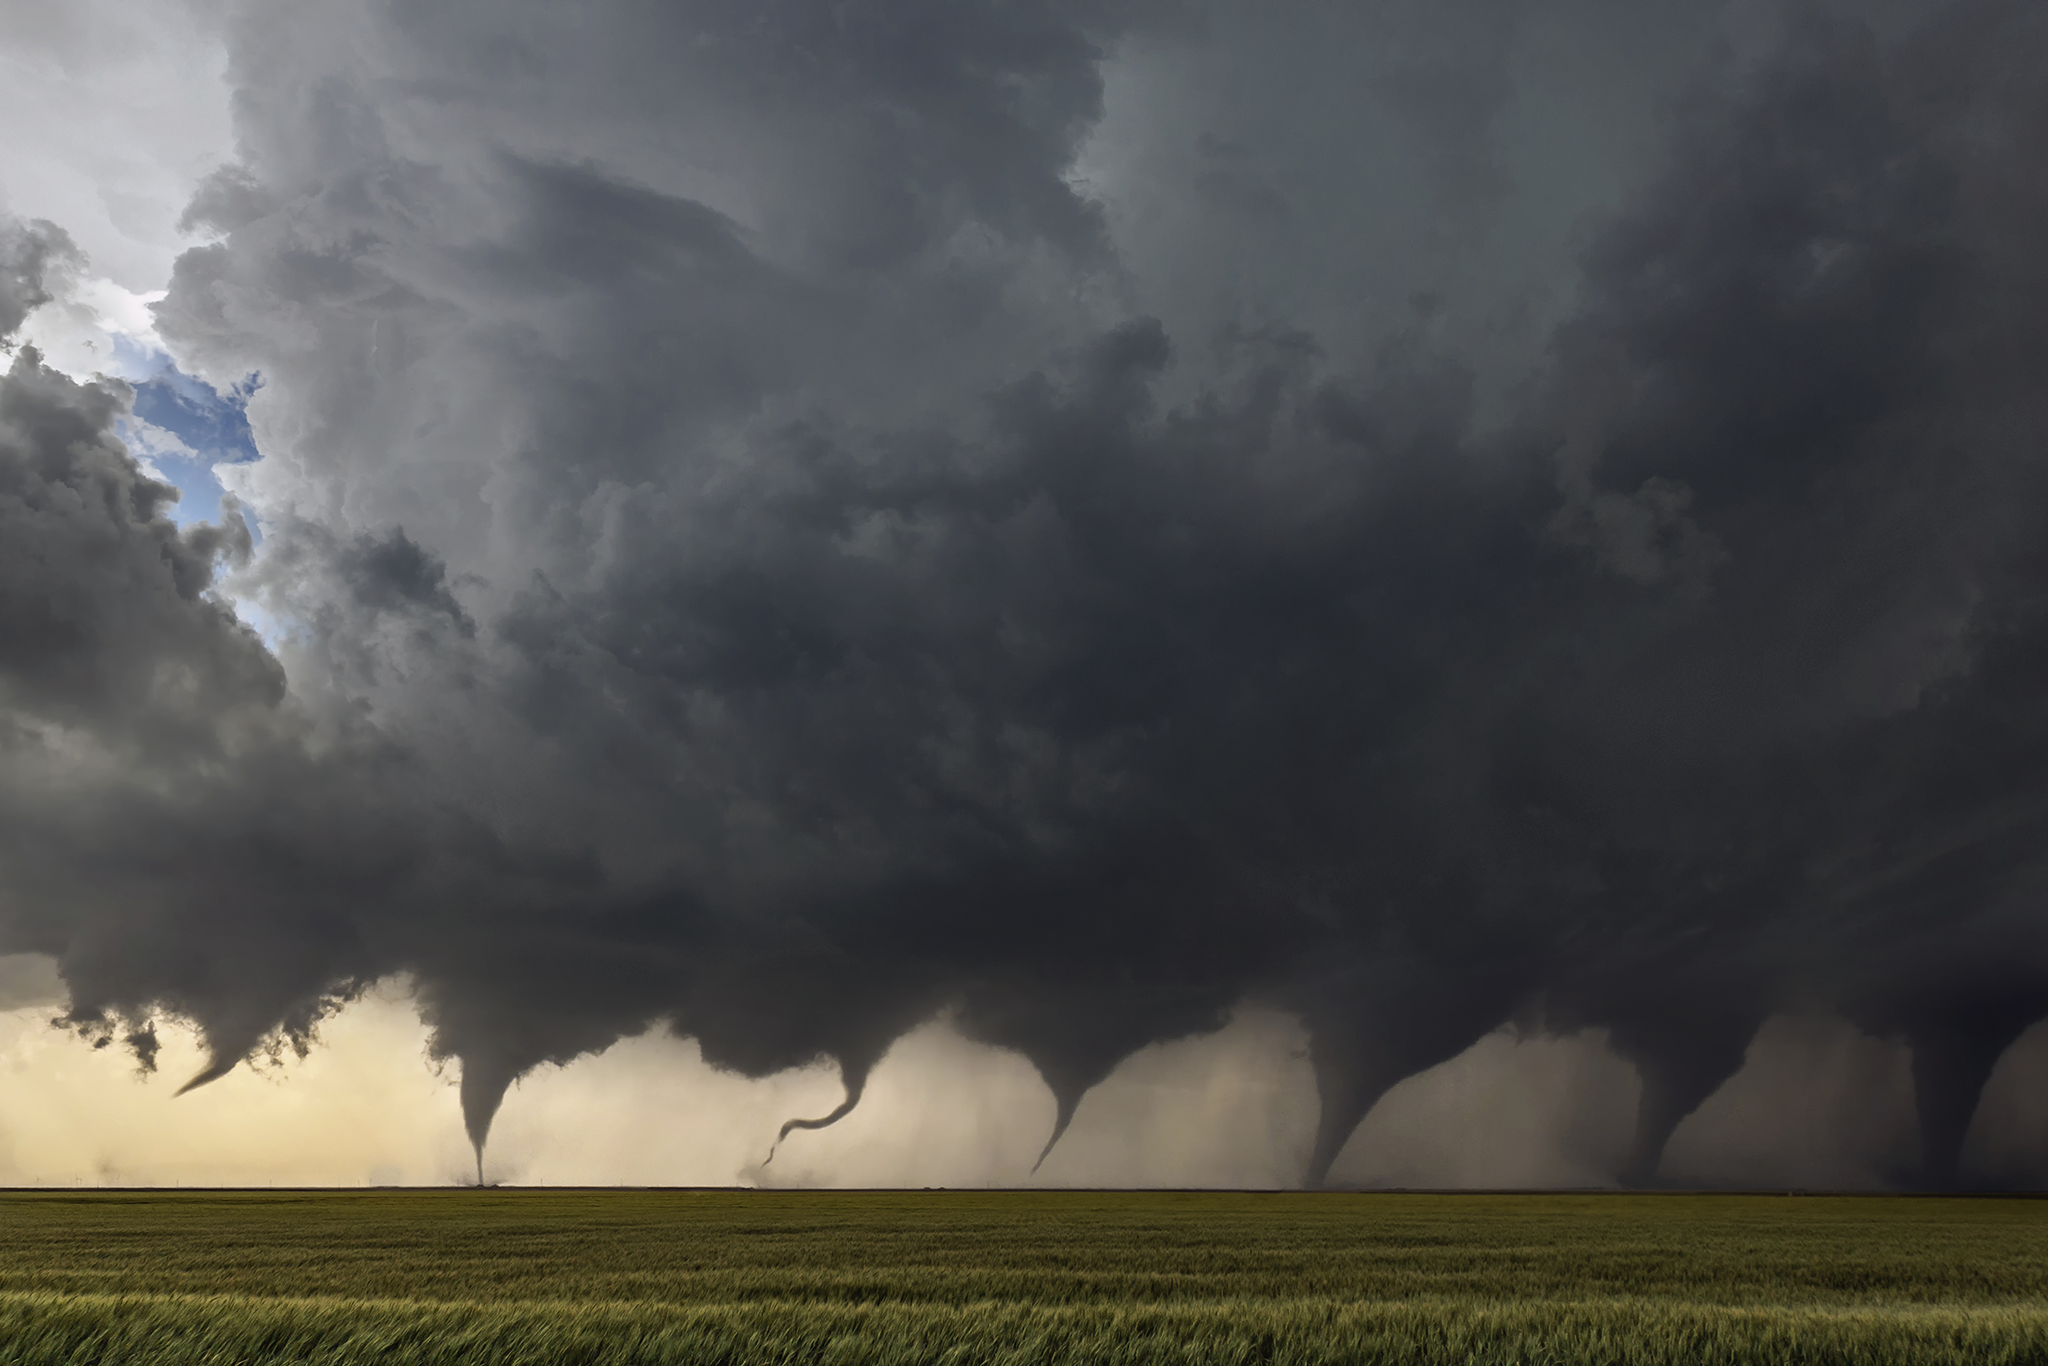 Tornado Photo Goes Viral: Does it Really Show a Mass of Tornadoes?